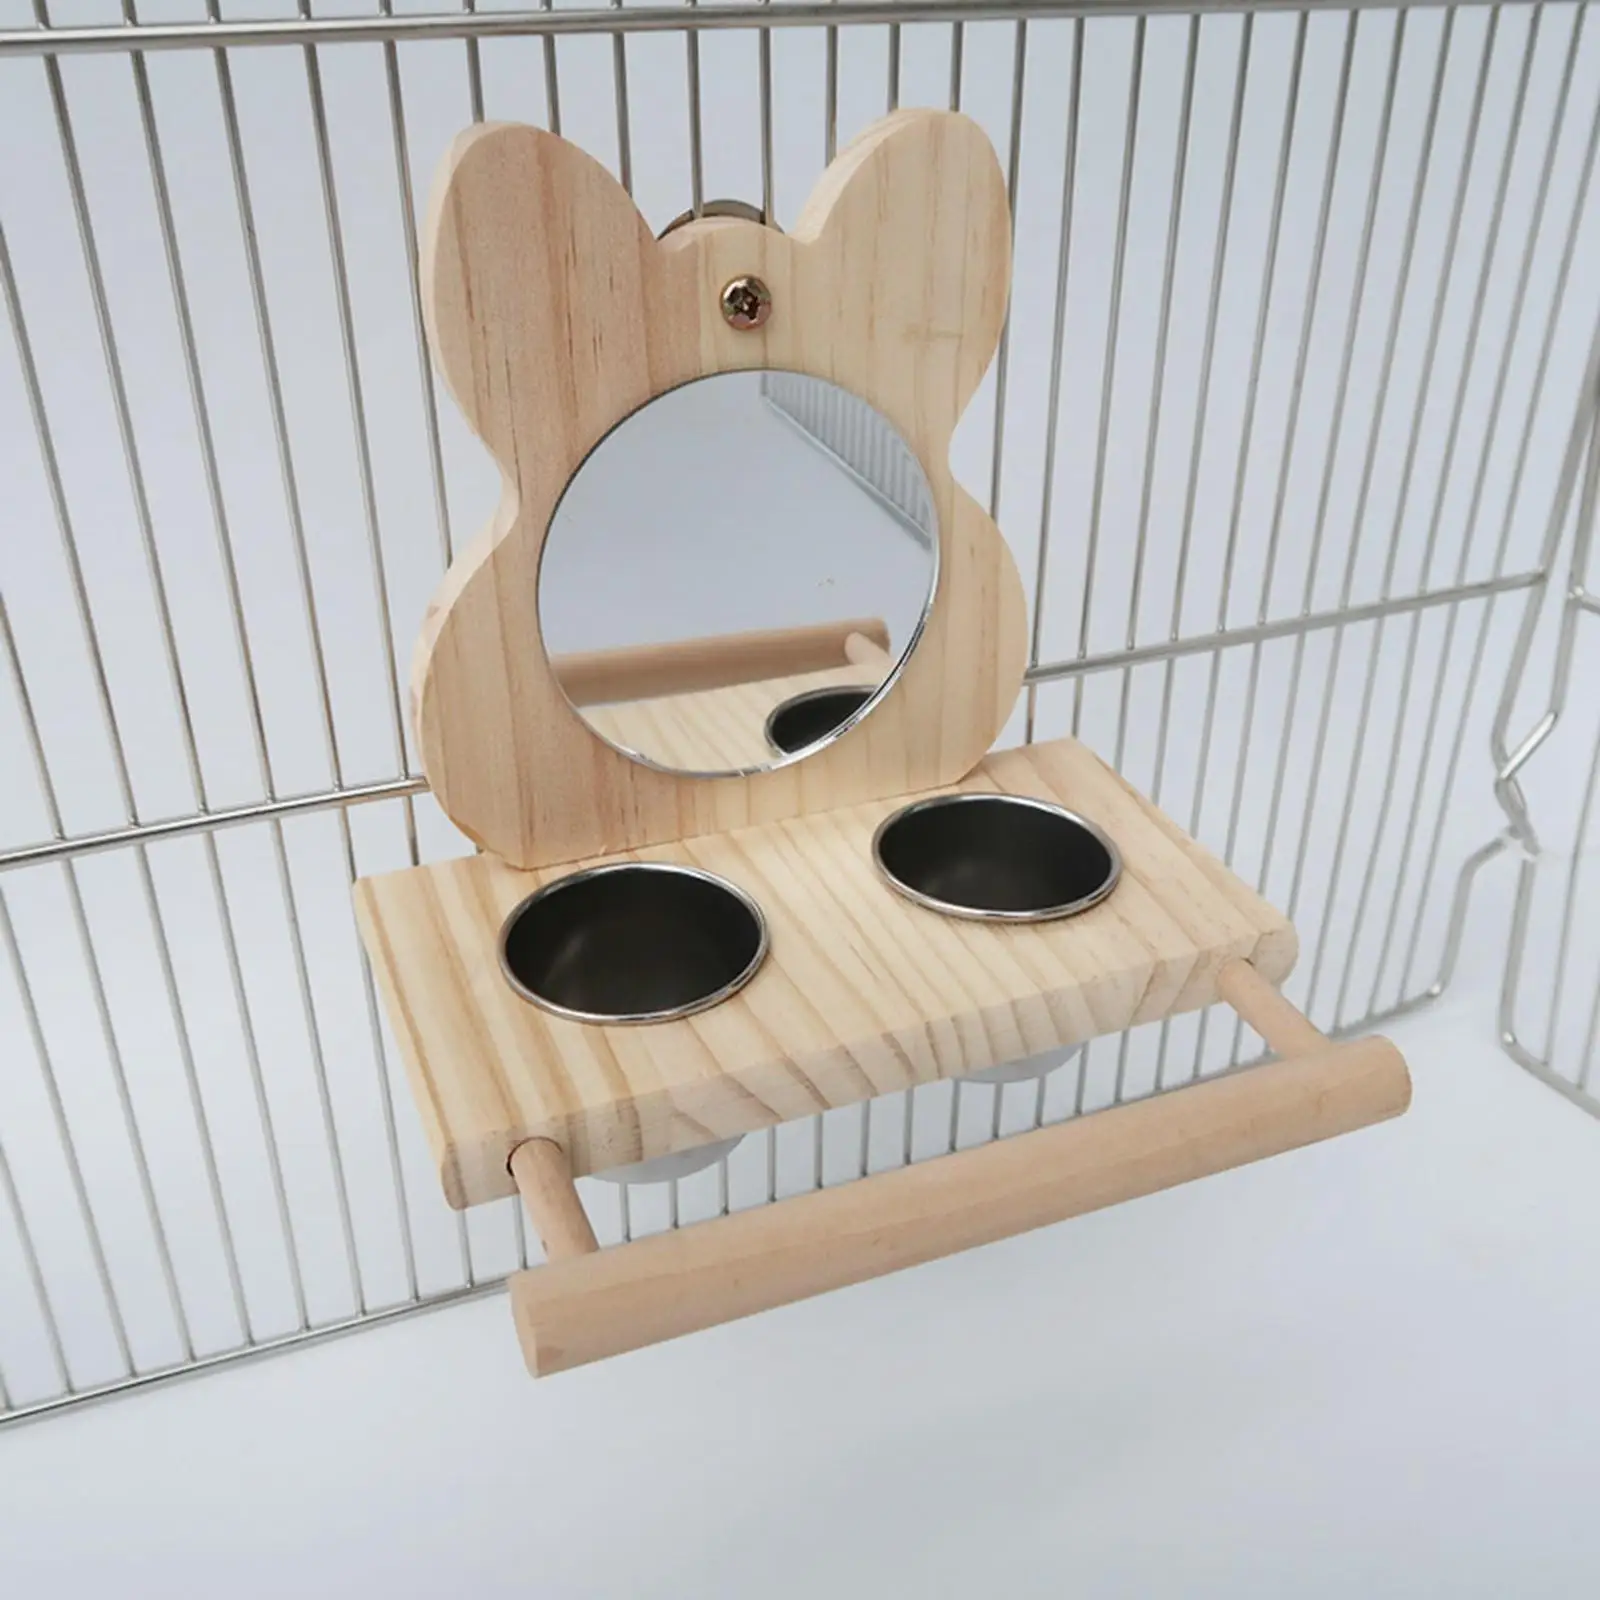 Parrots Mirror Feeder Cups Wooden Frames Wooden Perches Feeding Racks Dish Wooden Stands Water Bowl for Budgie Finch Toys